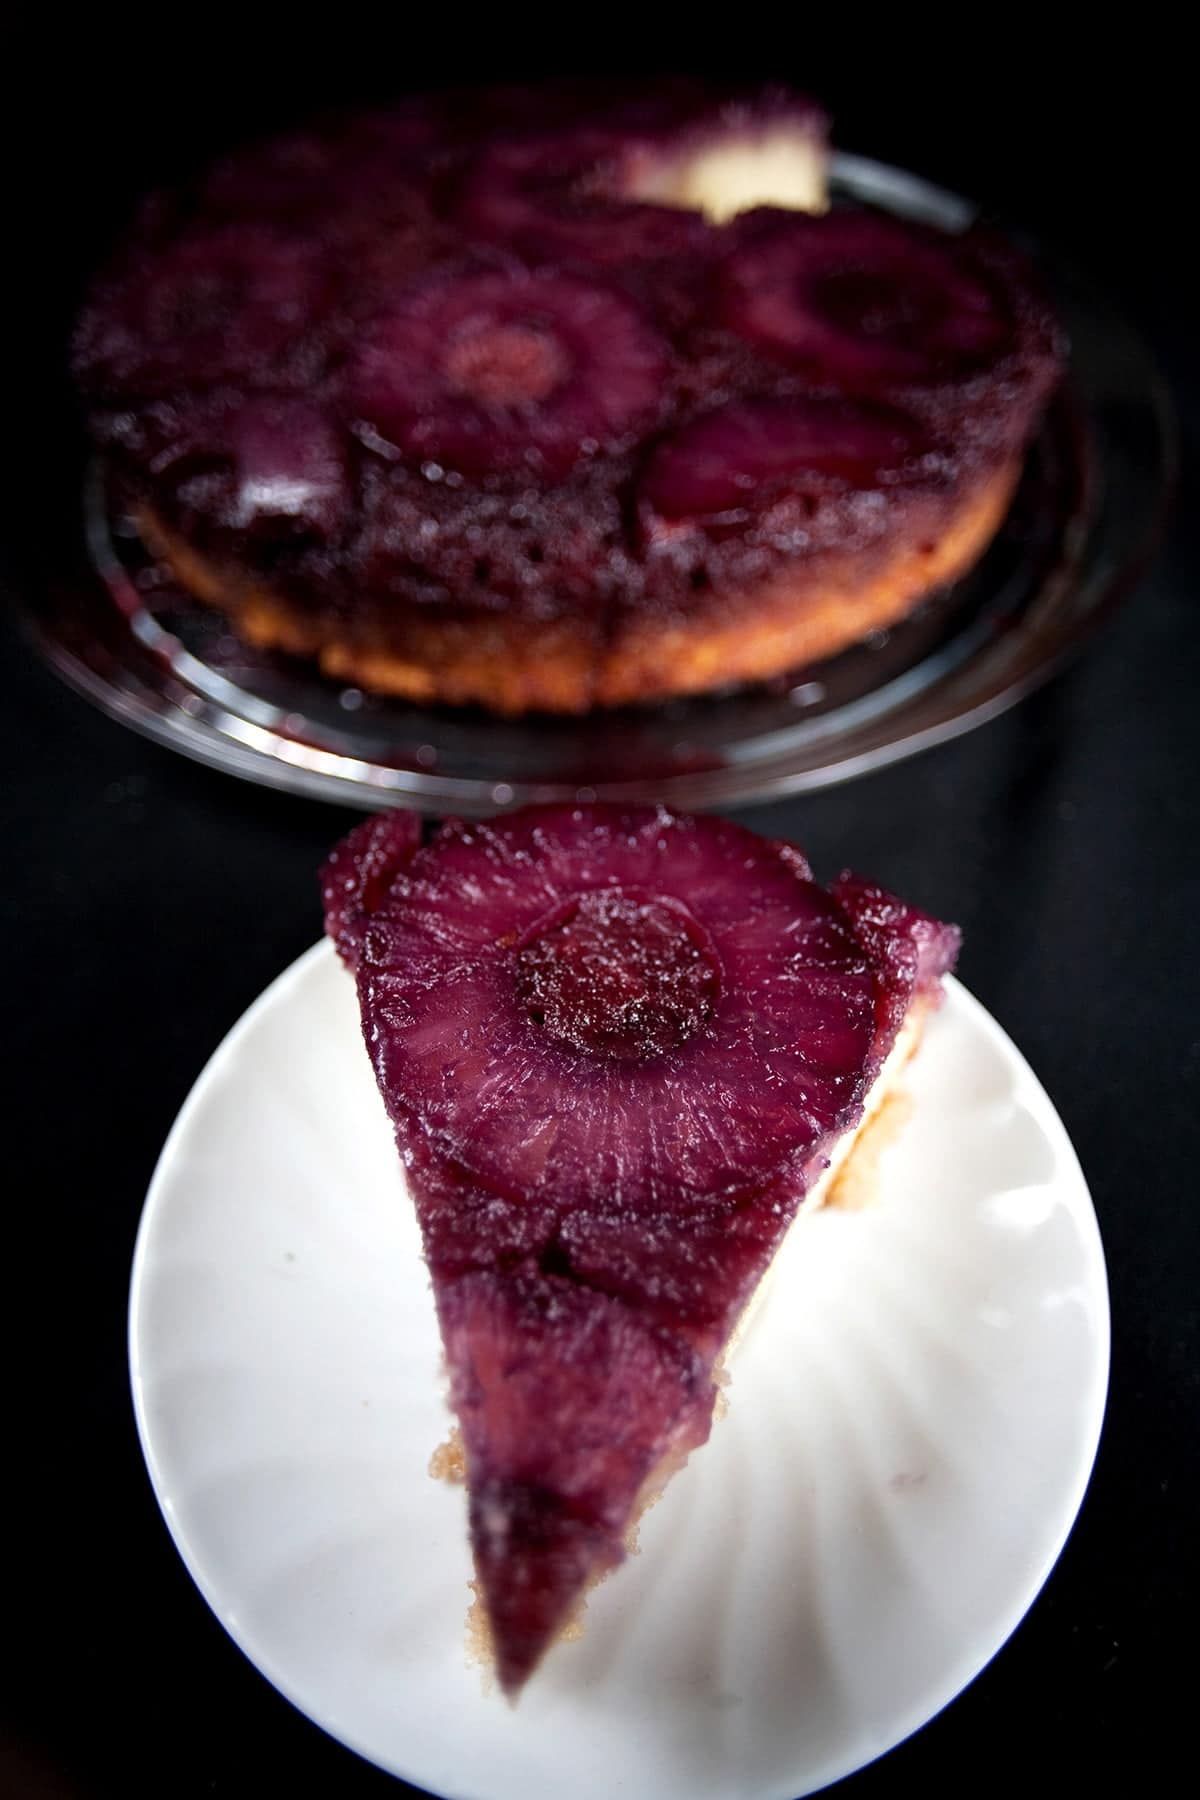 French Martini Upside Down Cake - A round pineapple upside down cake, with a VERY purple top! A slice has been cut out and is on a plate next to the main cake.